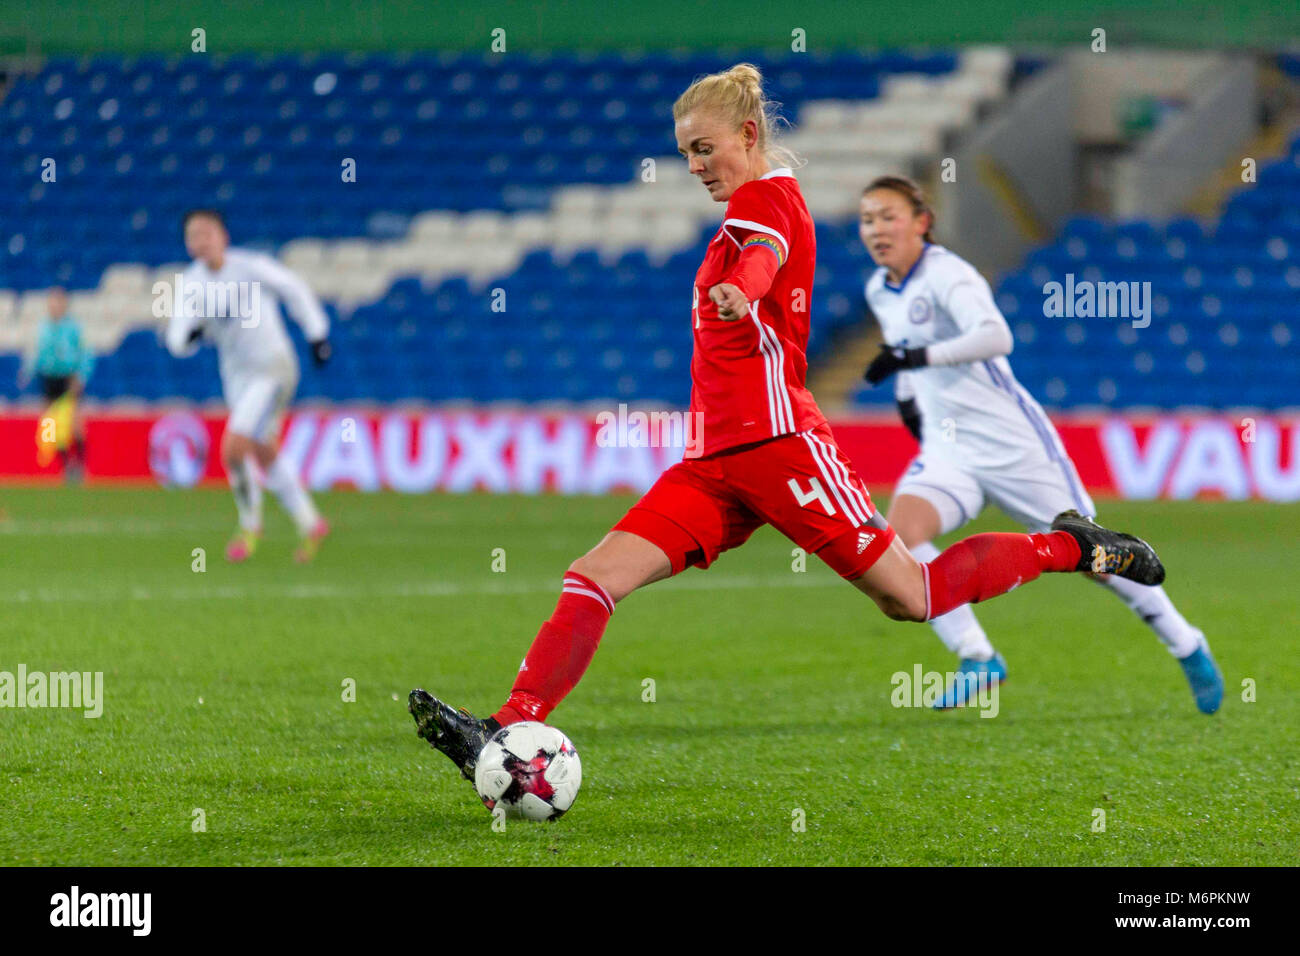 CARDIFF, UNITED KINGDOM. 24 November 2017. Wales women's national football team captain Sophie Ingle kicking the ball in a match against Kazakhstan. Stock Photo